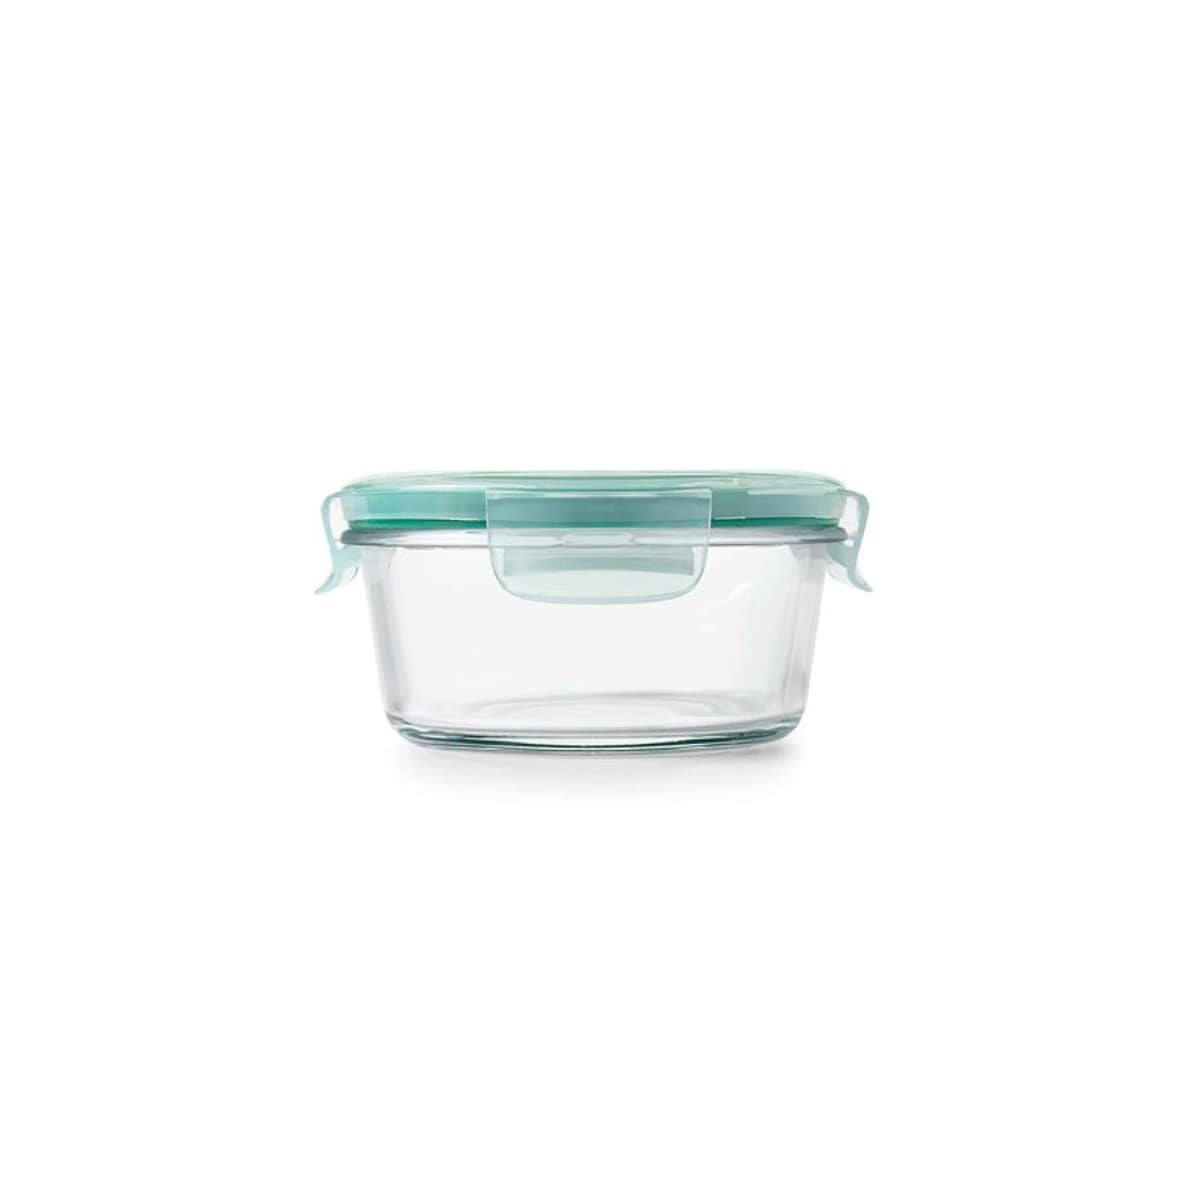 https://cdn.shopify.com/s/files/1/0473/5398/7229/products/oxo-oxo-good-grips-snap-glass-round-container-2-cup-719812047478-19594522919072_1600x.jpg?v=1626104102